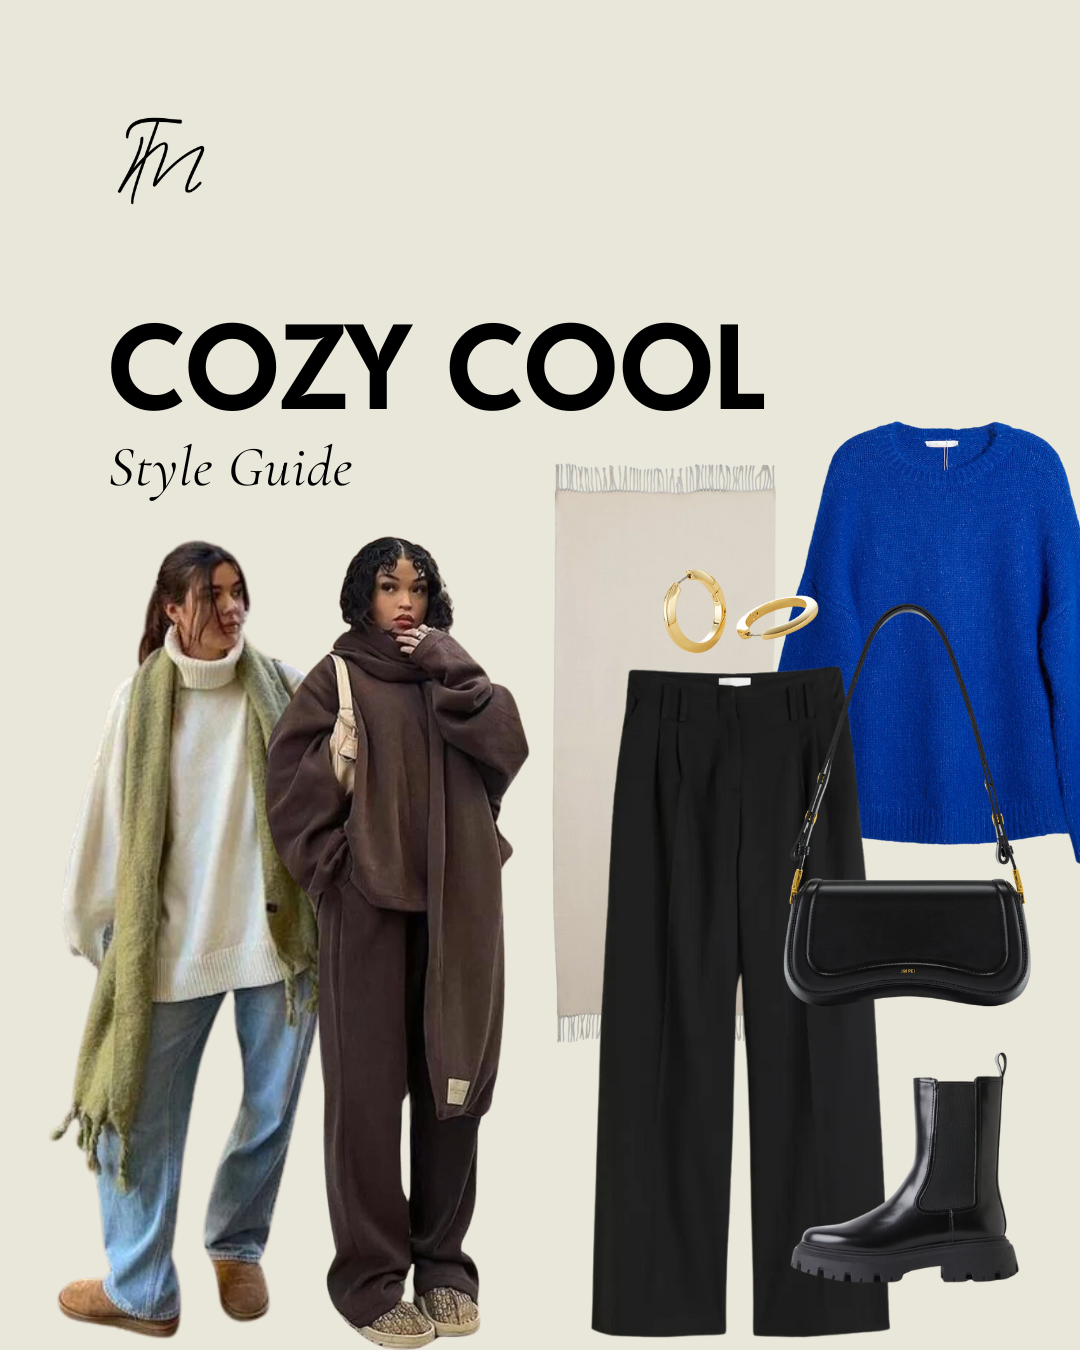 Cozy cool guide